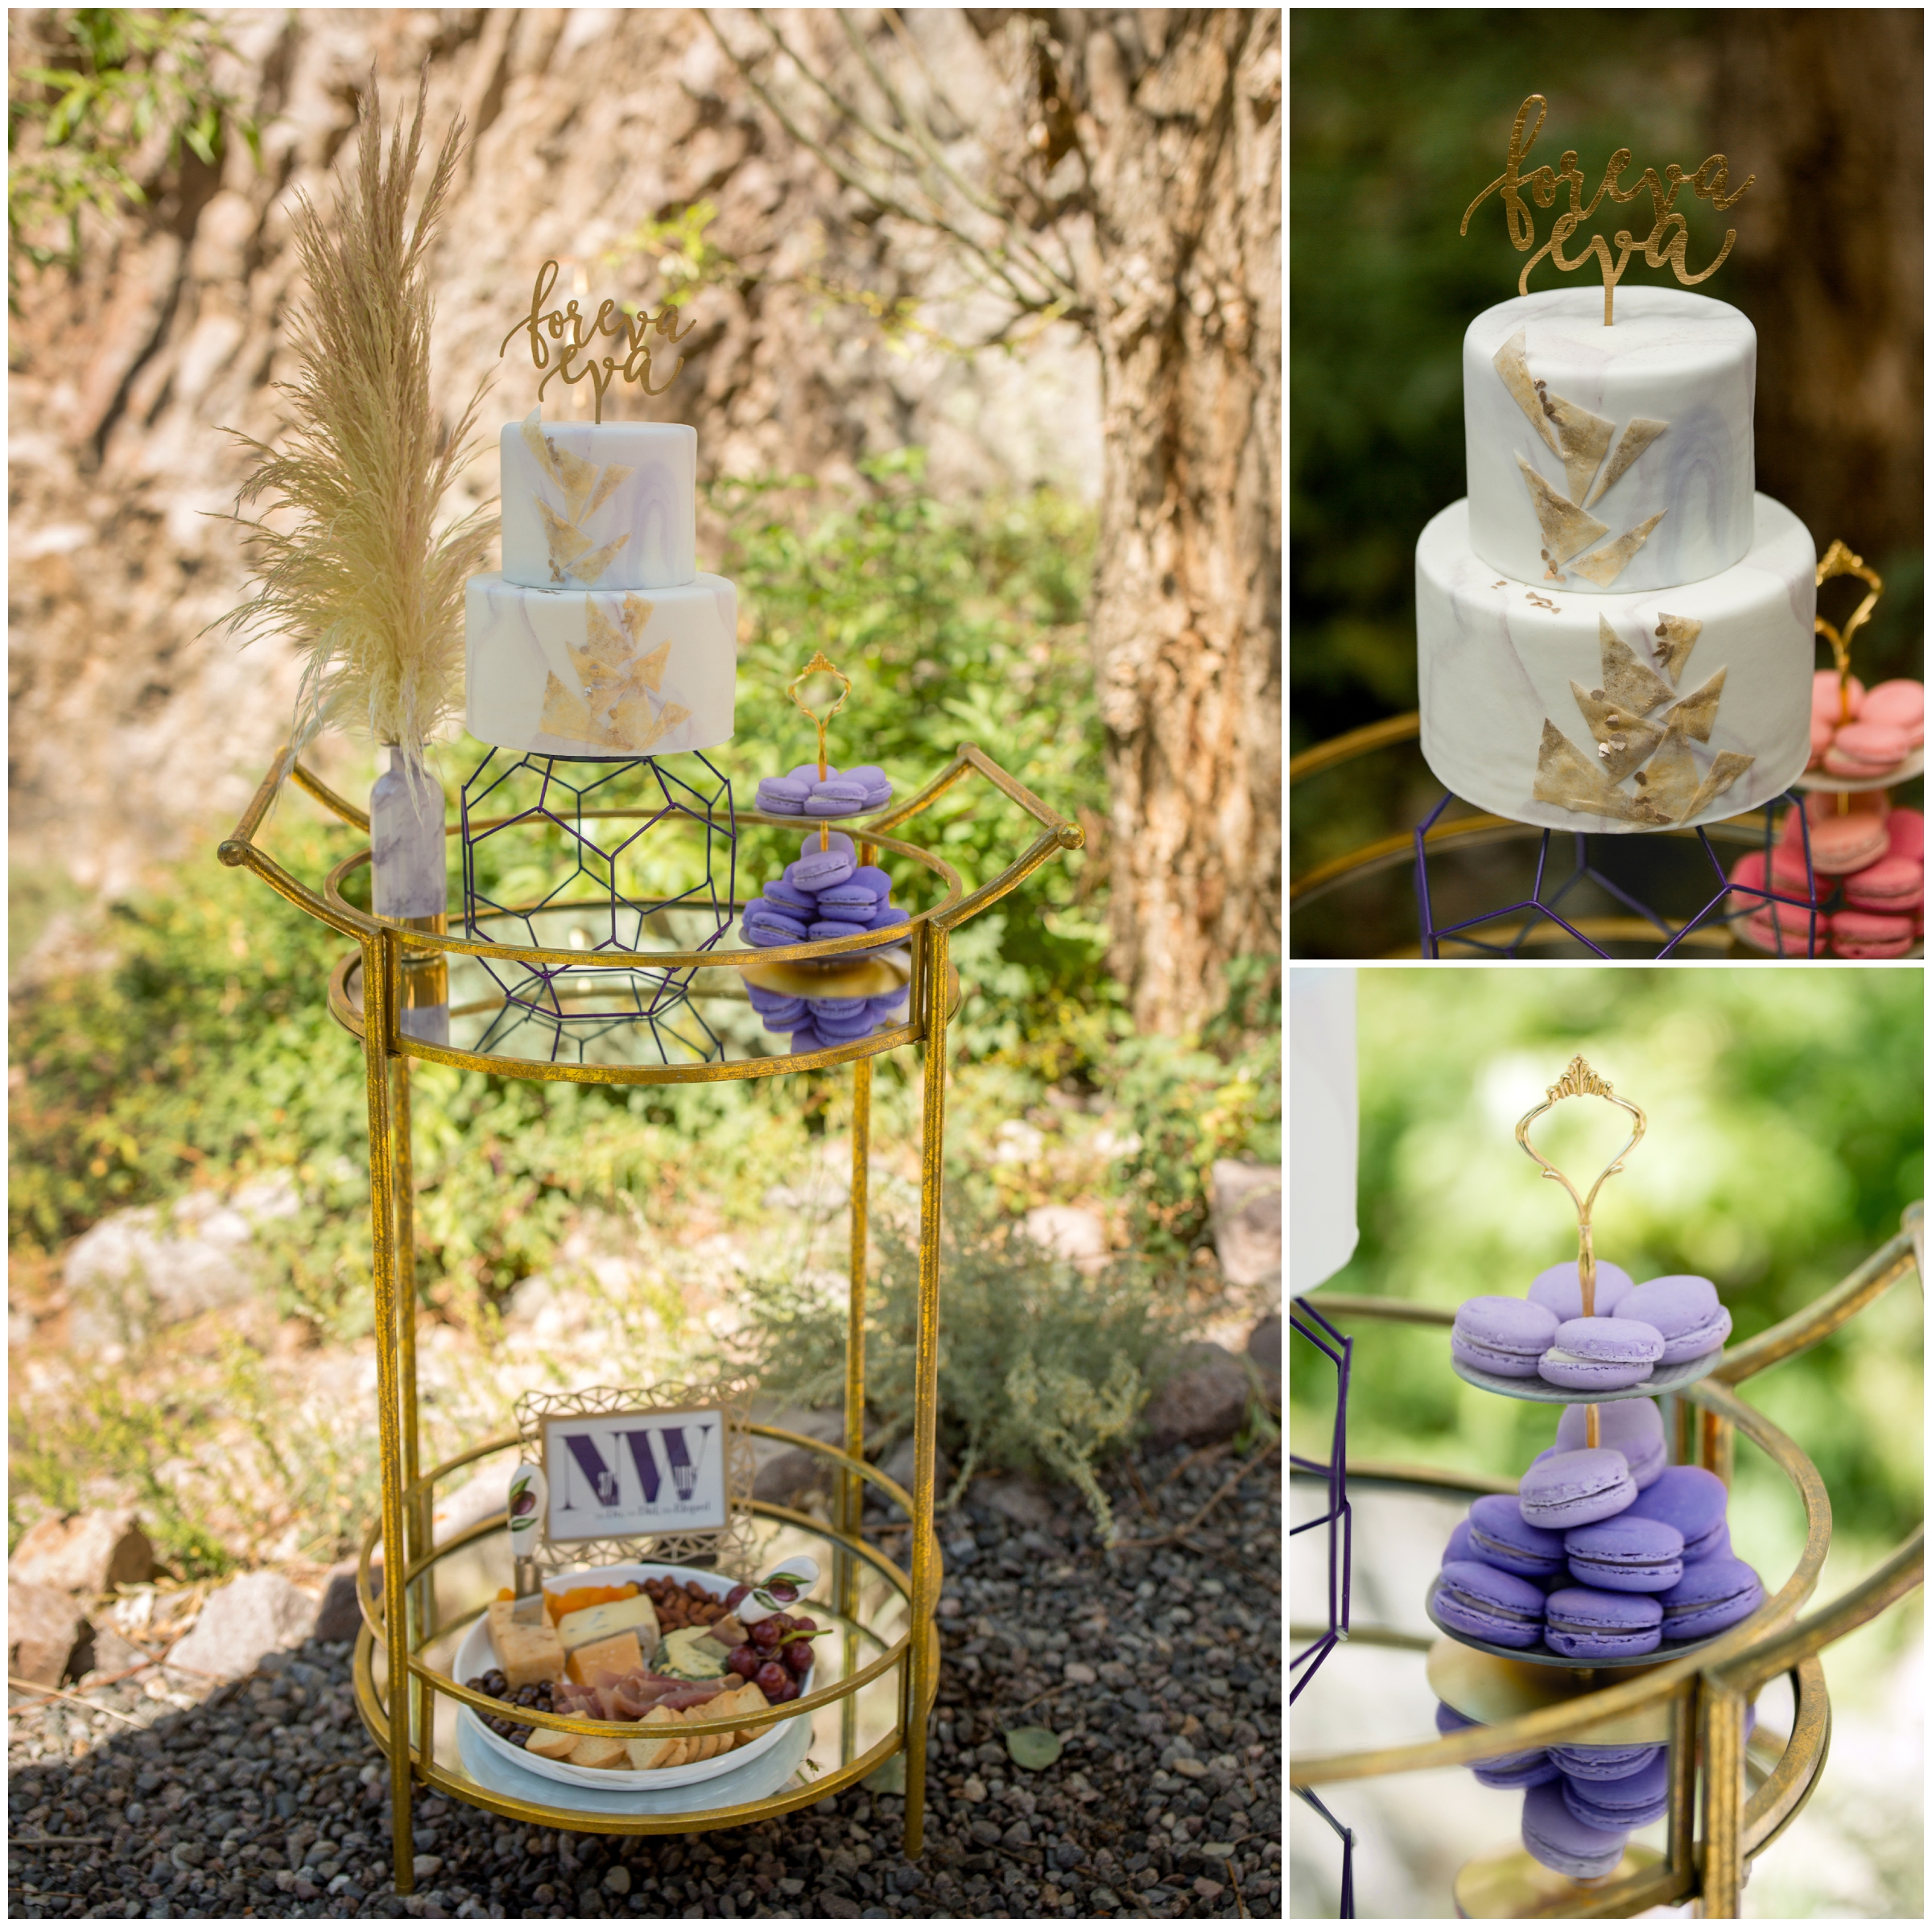 Geometric wedding cake inspiration with purple and gold details by Kelley Cakes Denver